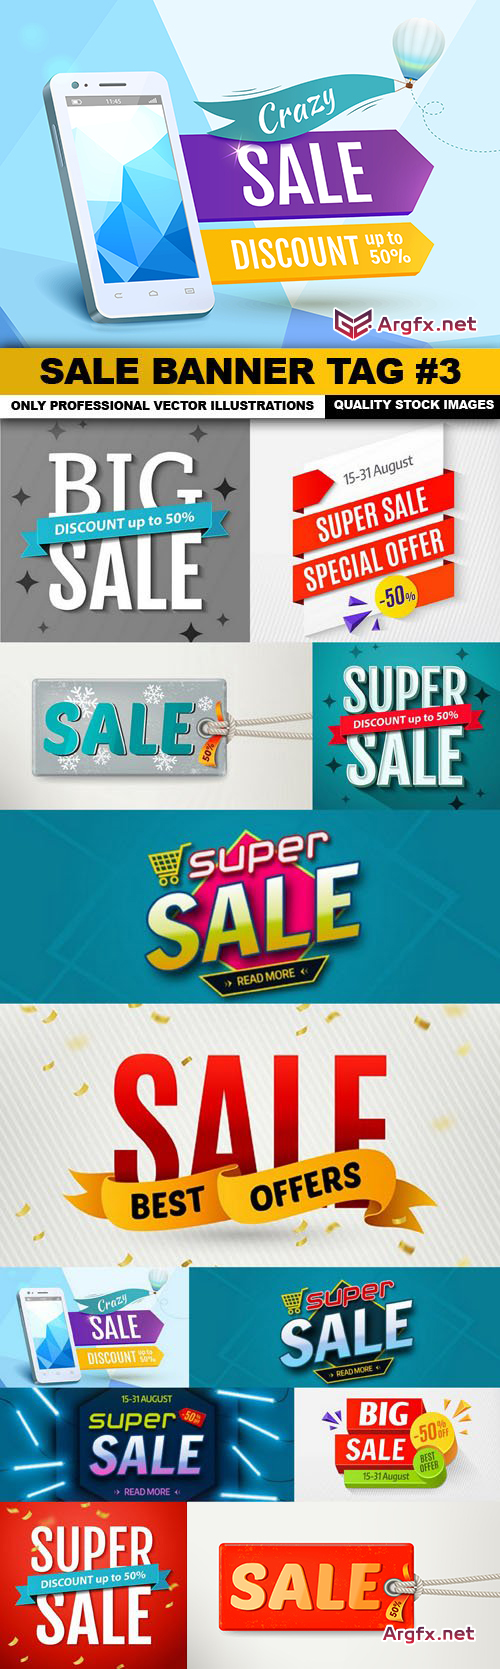  Sale Banner Tag #3 - 12 Vector